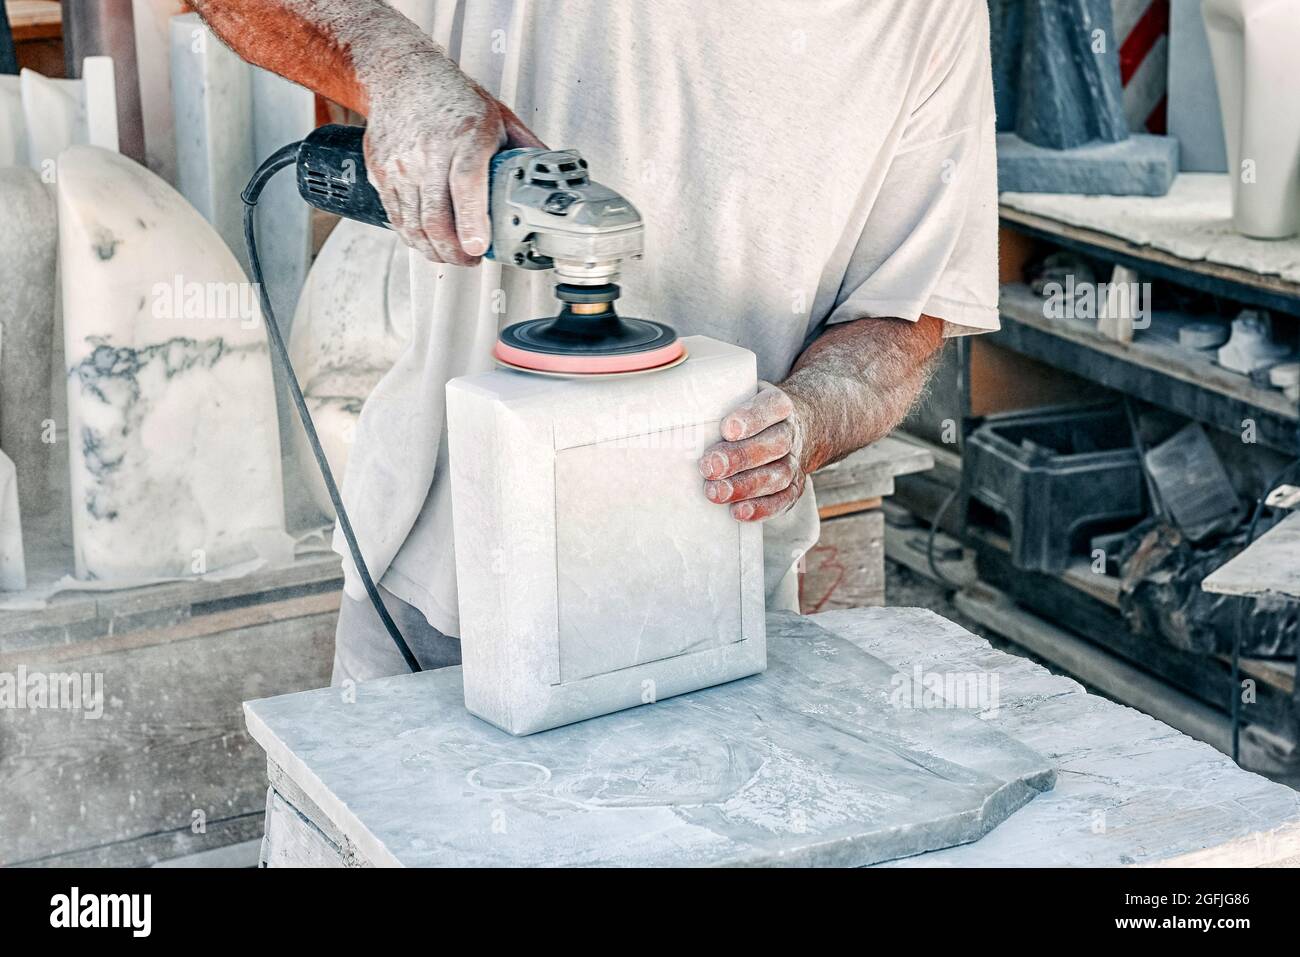 Man using an orbital sander to smooth a block of marble in a workshop during the production process in a close up on his hands and the power tool Stock Photo